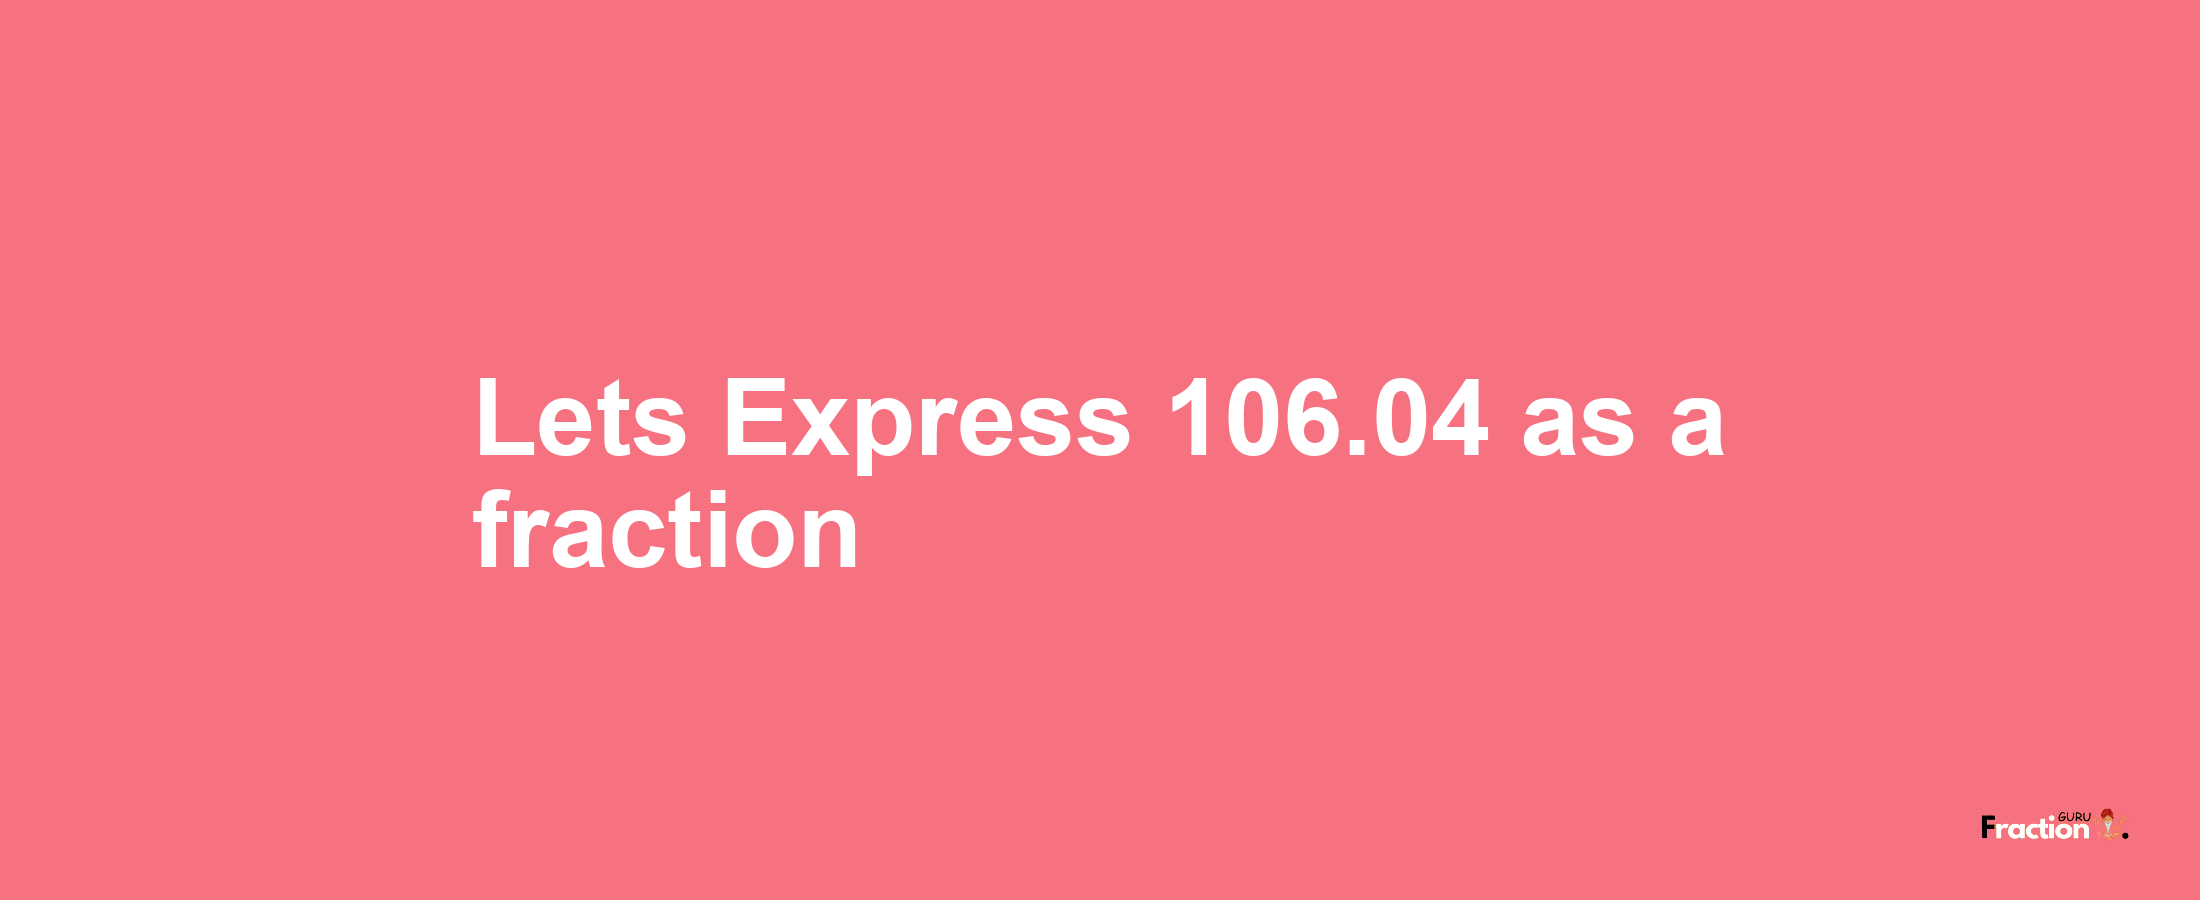 Lets Express 106.04 as afraction